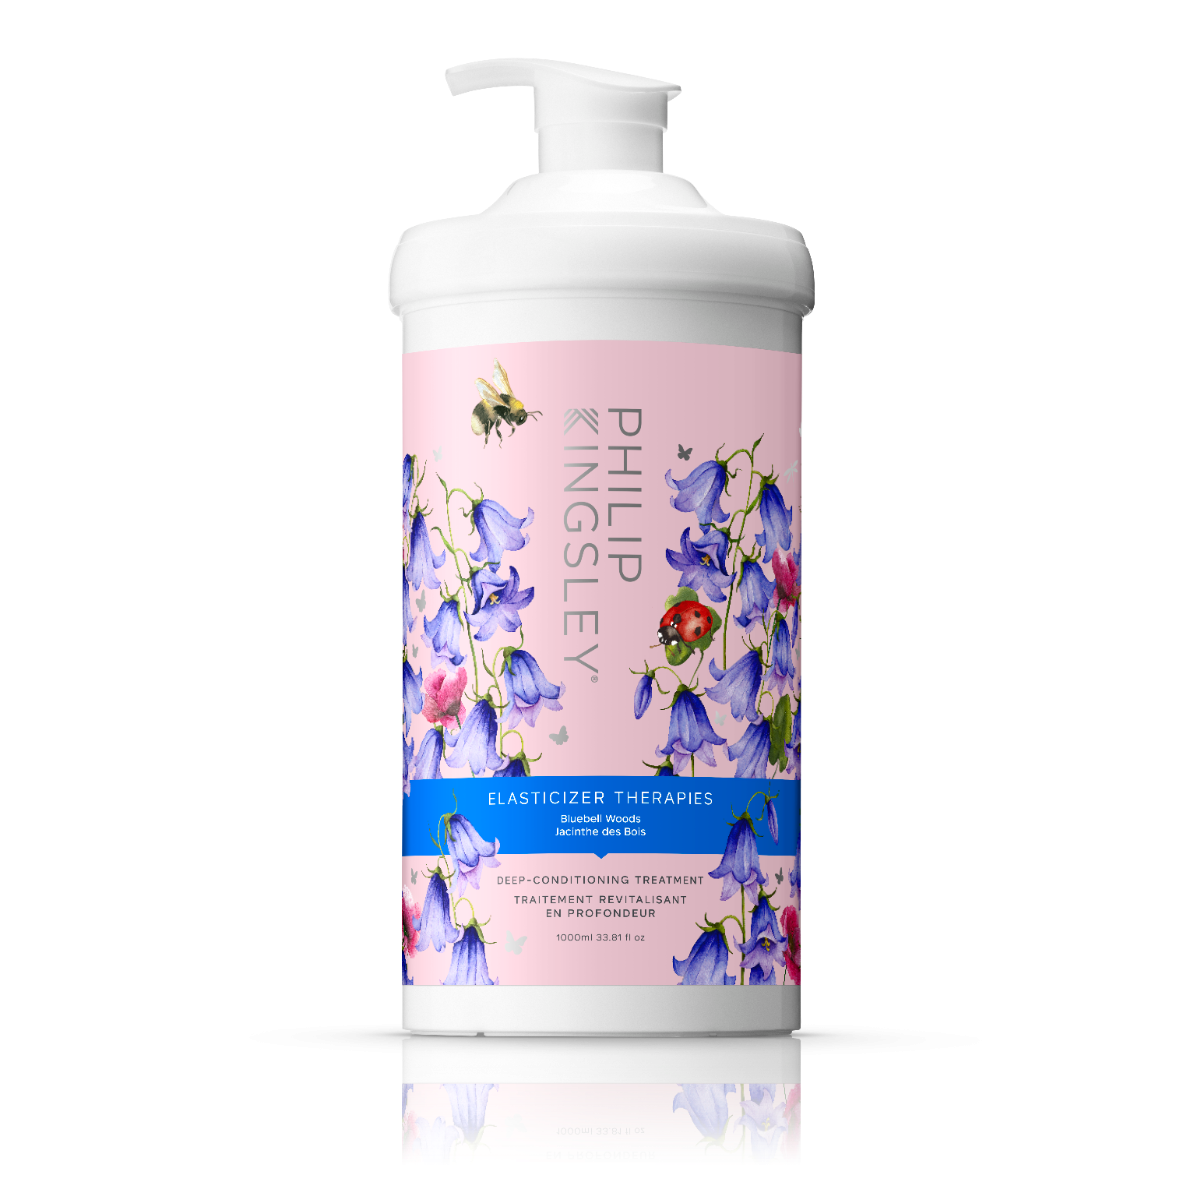 Elasticizer Therapies Bluebell Woods Deep-Conditioning Treatment 1000ml